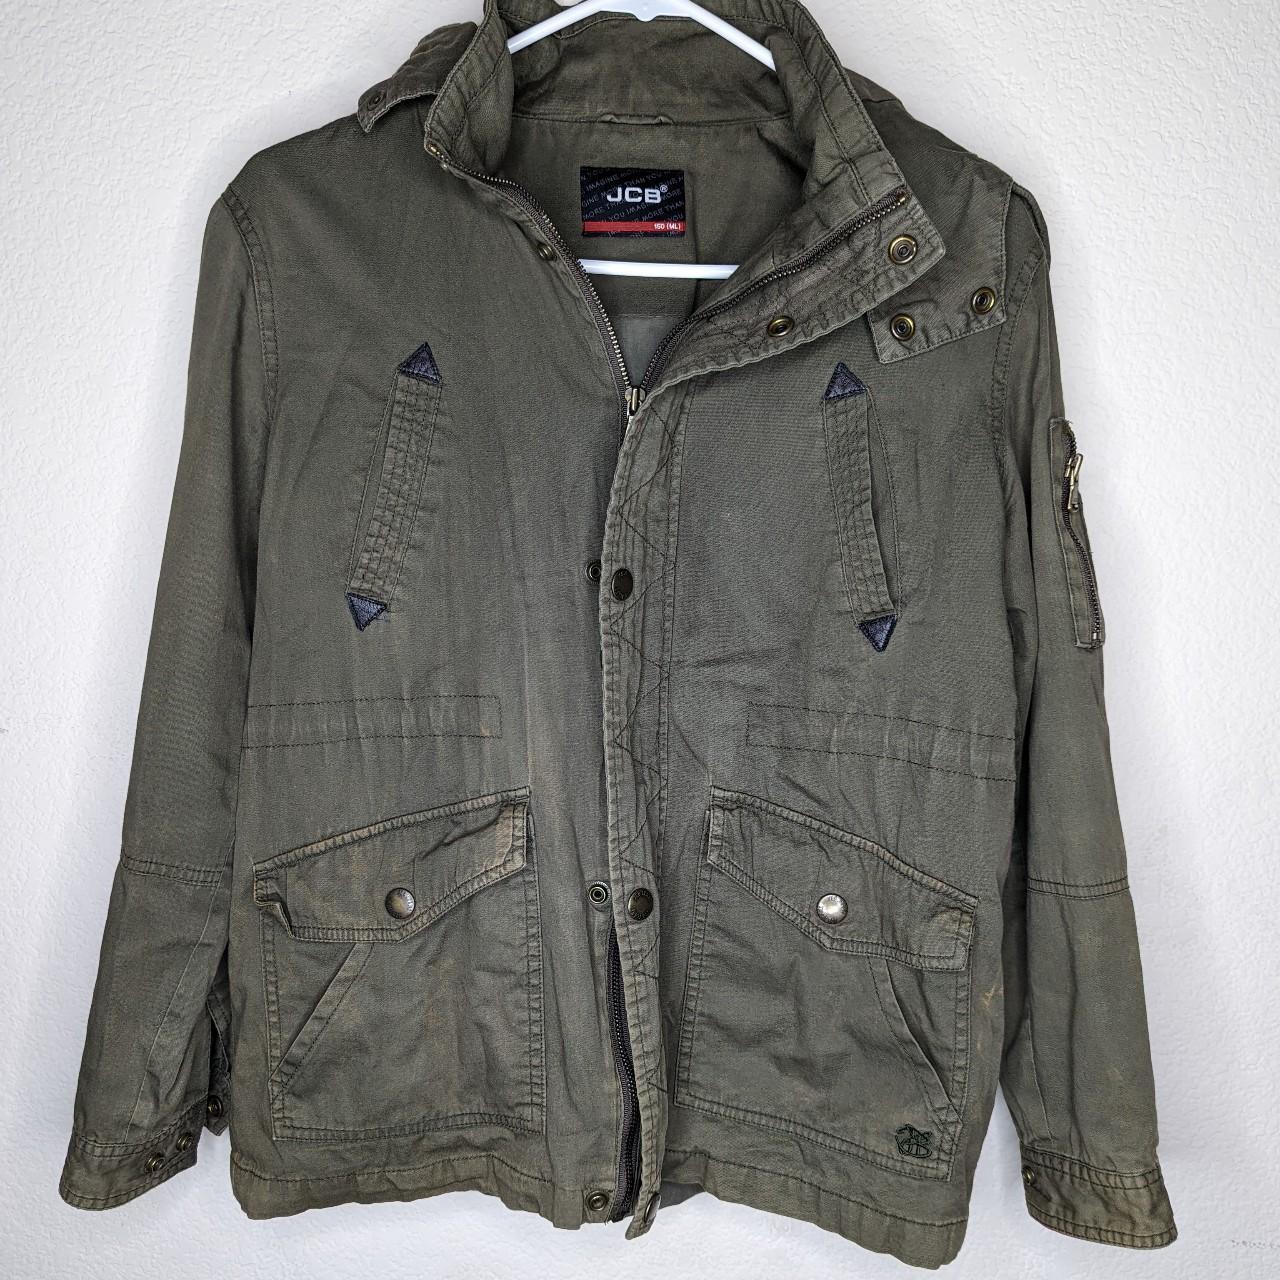 Product Image 2 - Imported military green/olive jacket or